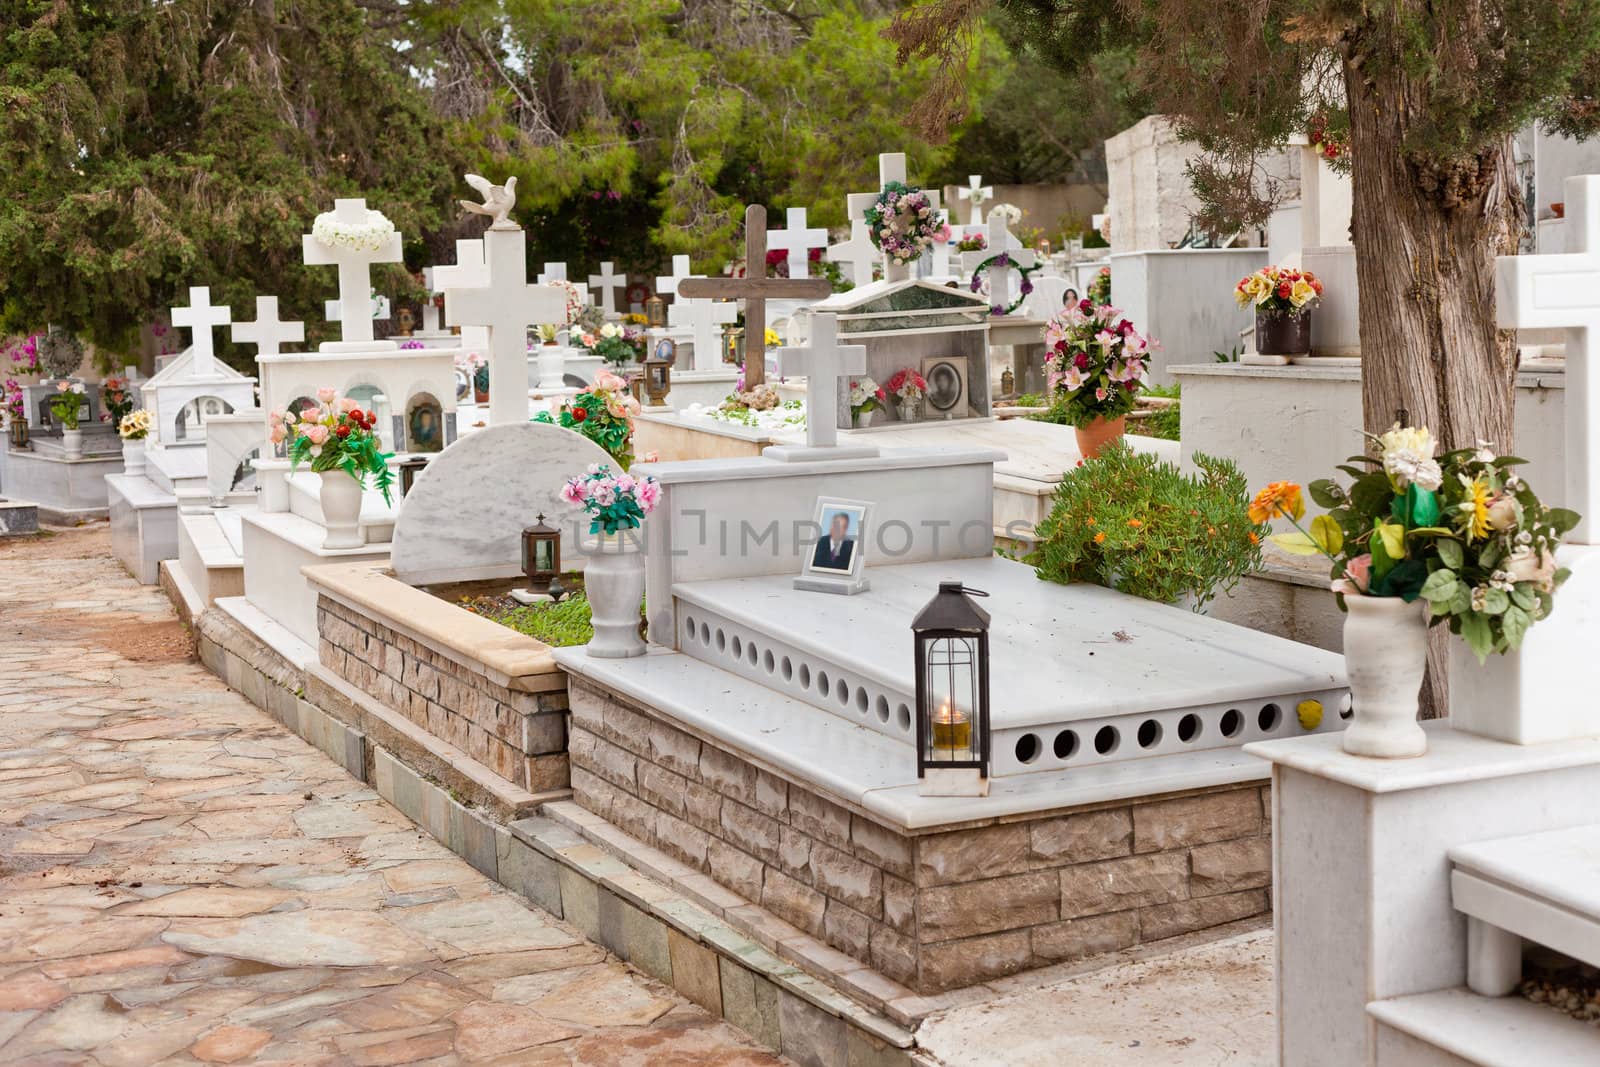 Typical Greek-orthodox cemetery in Greece, Europe, with flowers and images of loved ones (blurred) on graves.